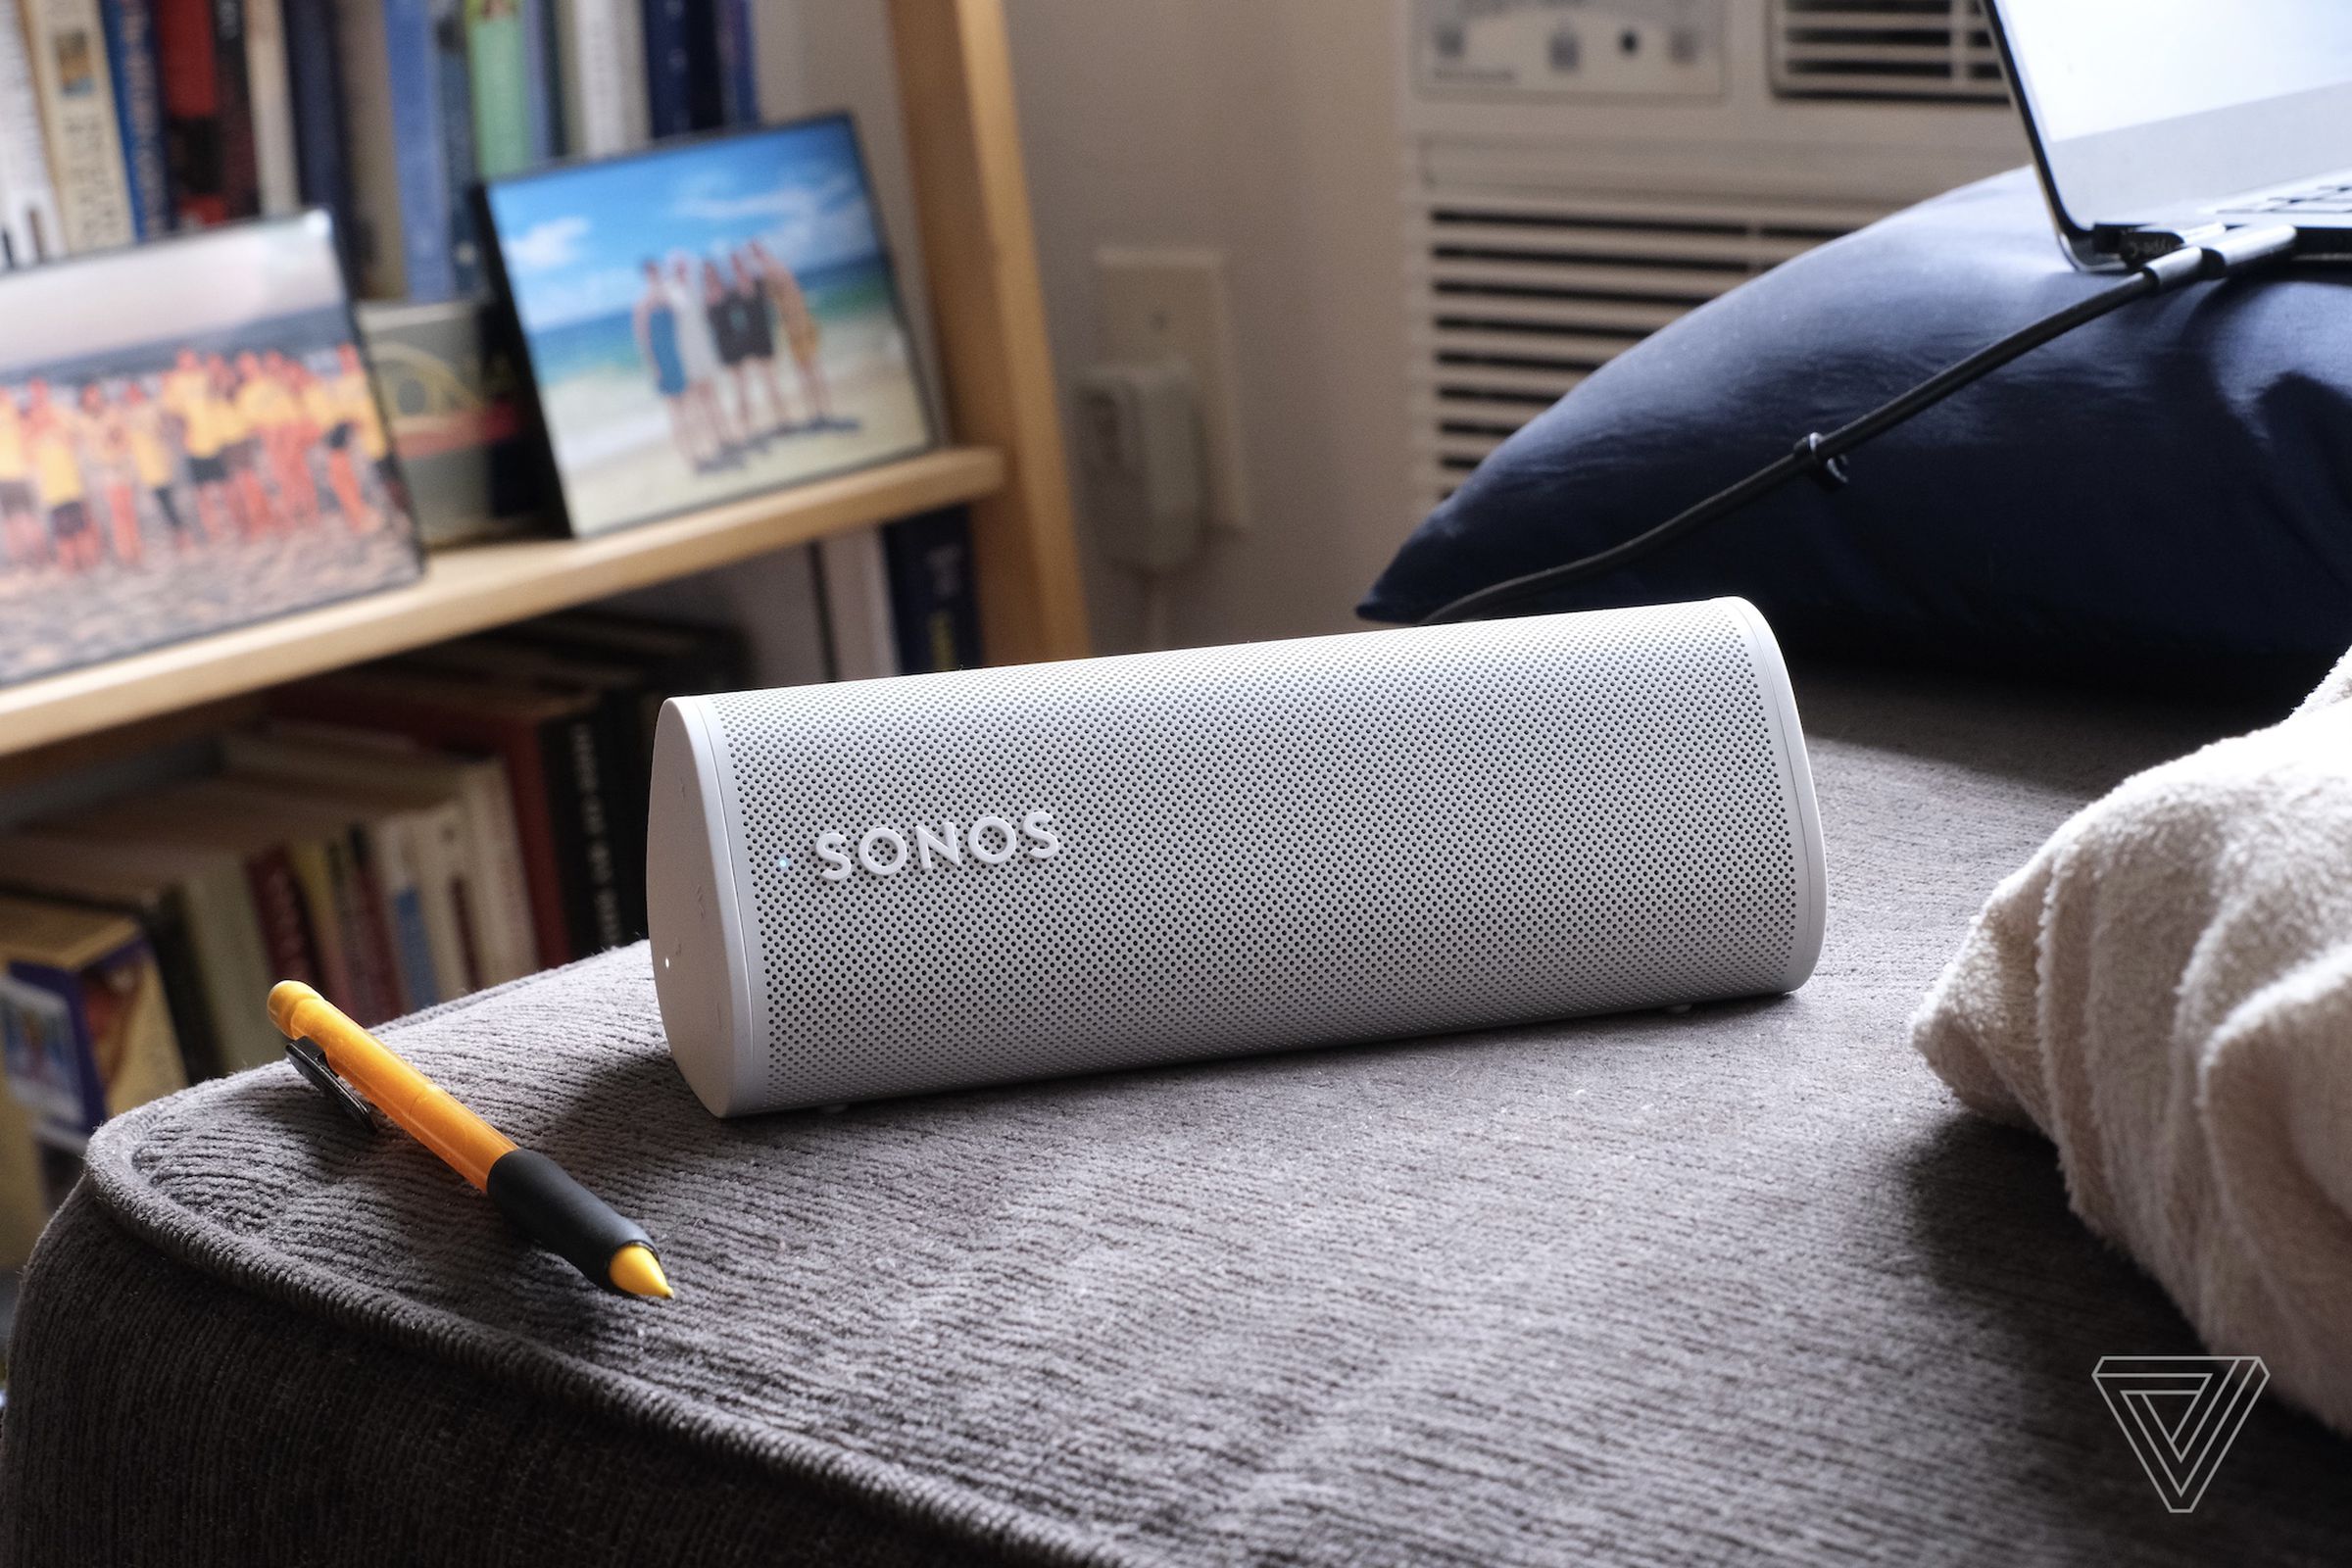 The white Sonos Roam sitting on a bed with picture frames behind it.